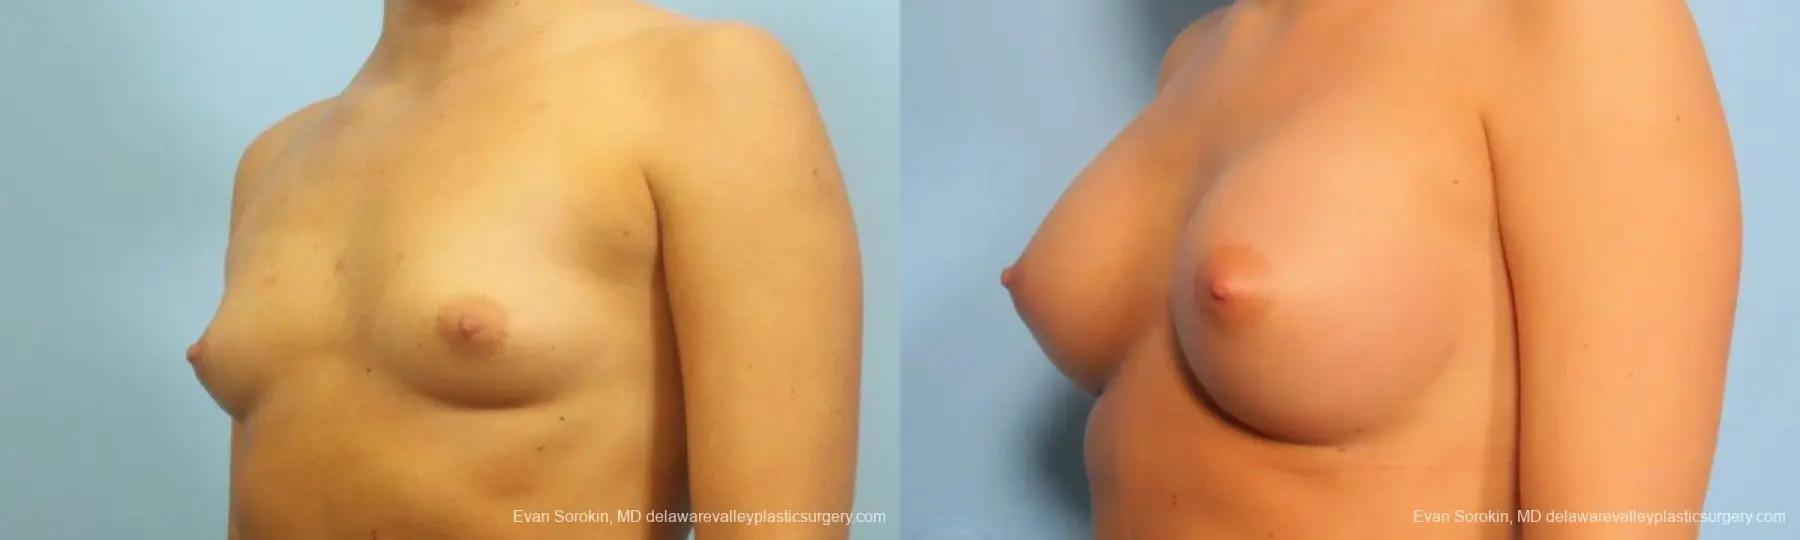 Philadelphia Breast Augmentation 9183 - Before and After 4